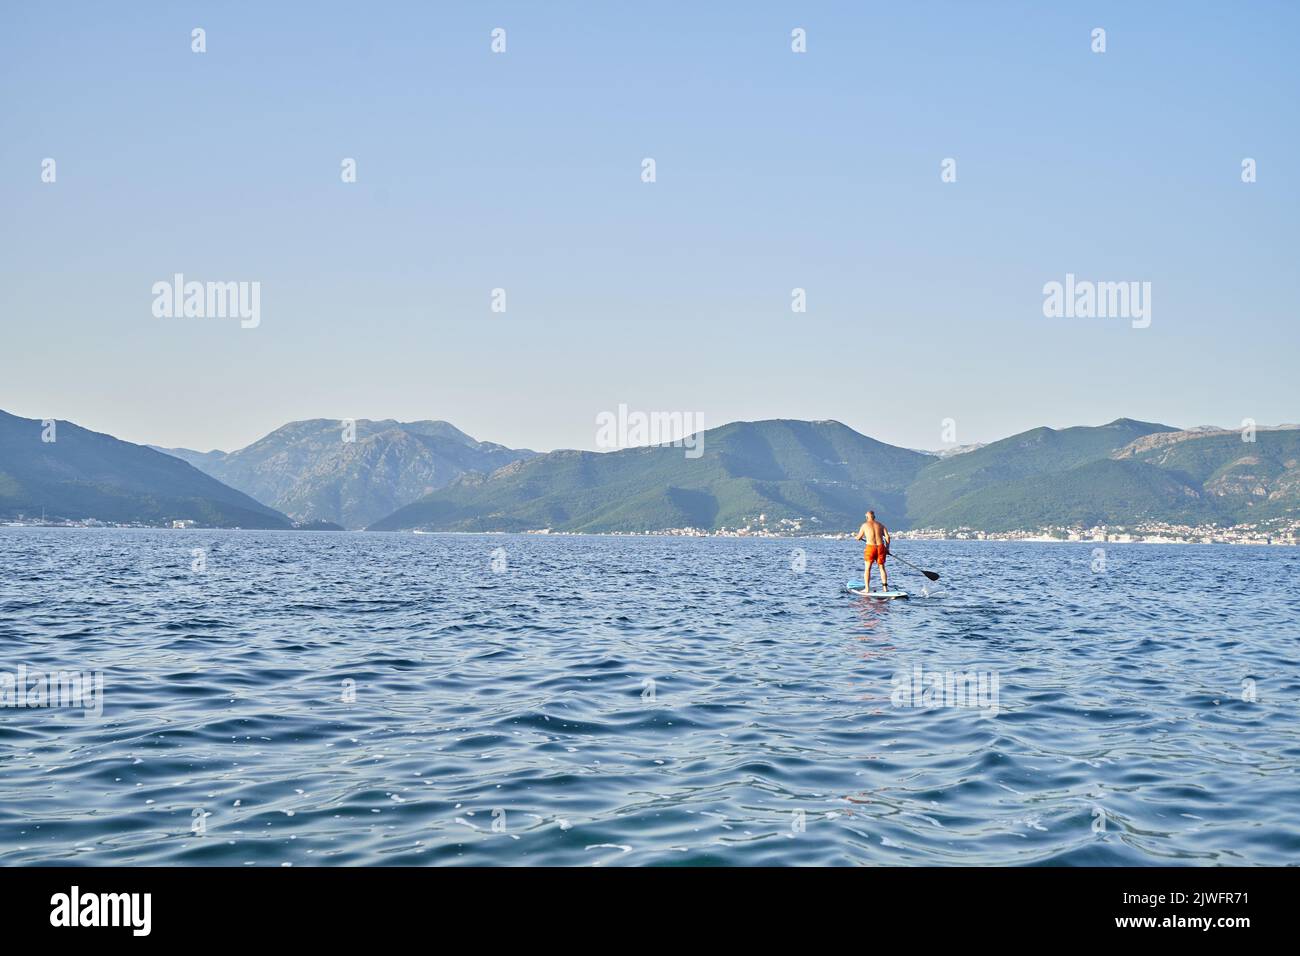 A man swims on a sub board in the Sea Stock Photo